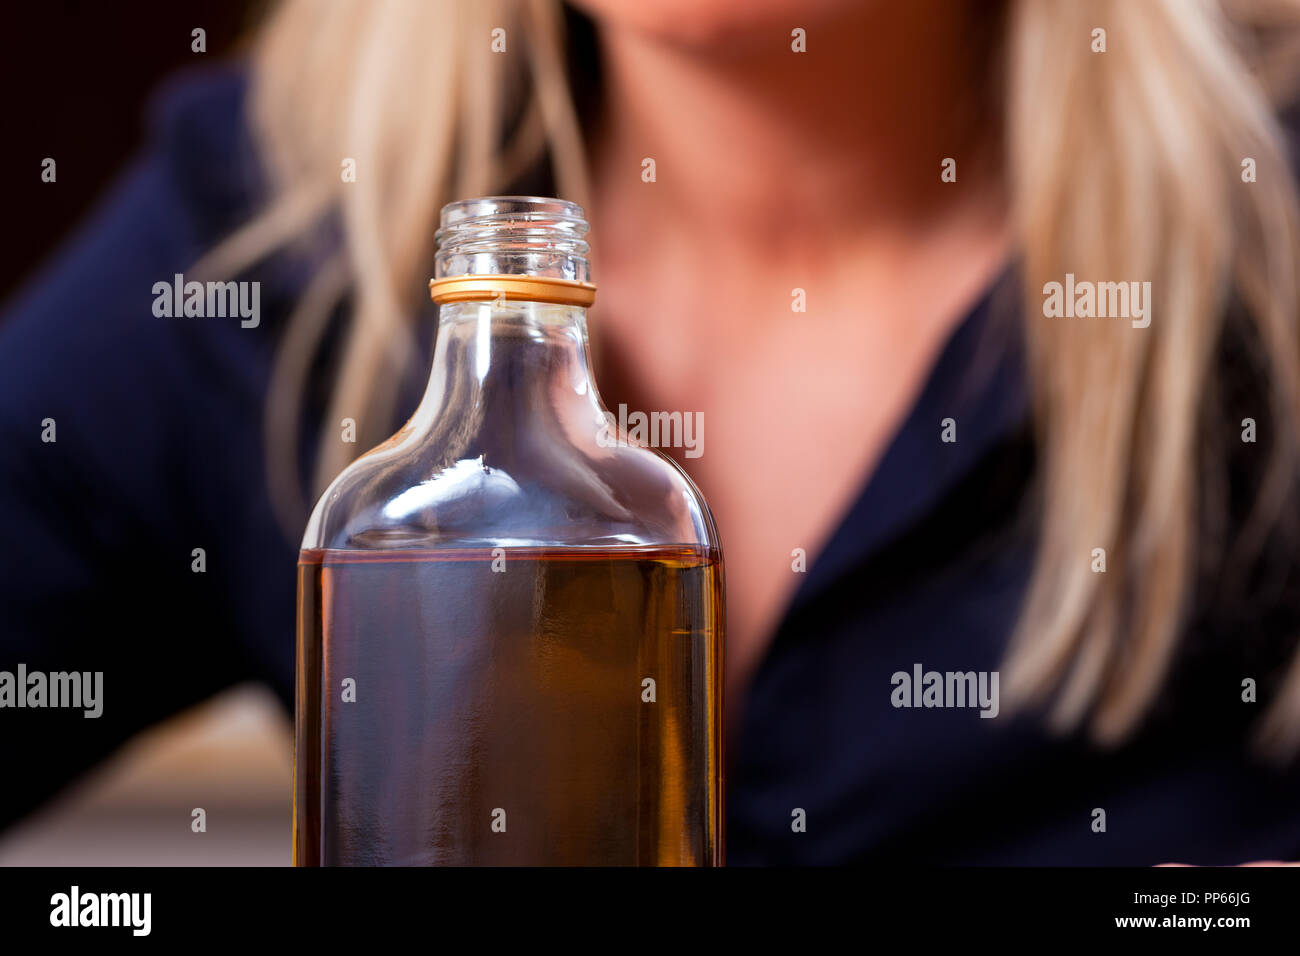 A Girl with a Bad Appearance Holds a Bottle of Alcohol Near Her Head. on a  Gray Background. Stock Image - Image of girl, excitement: 106671949